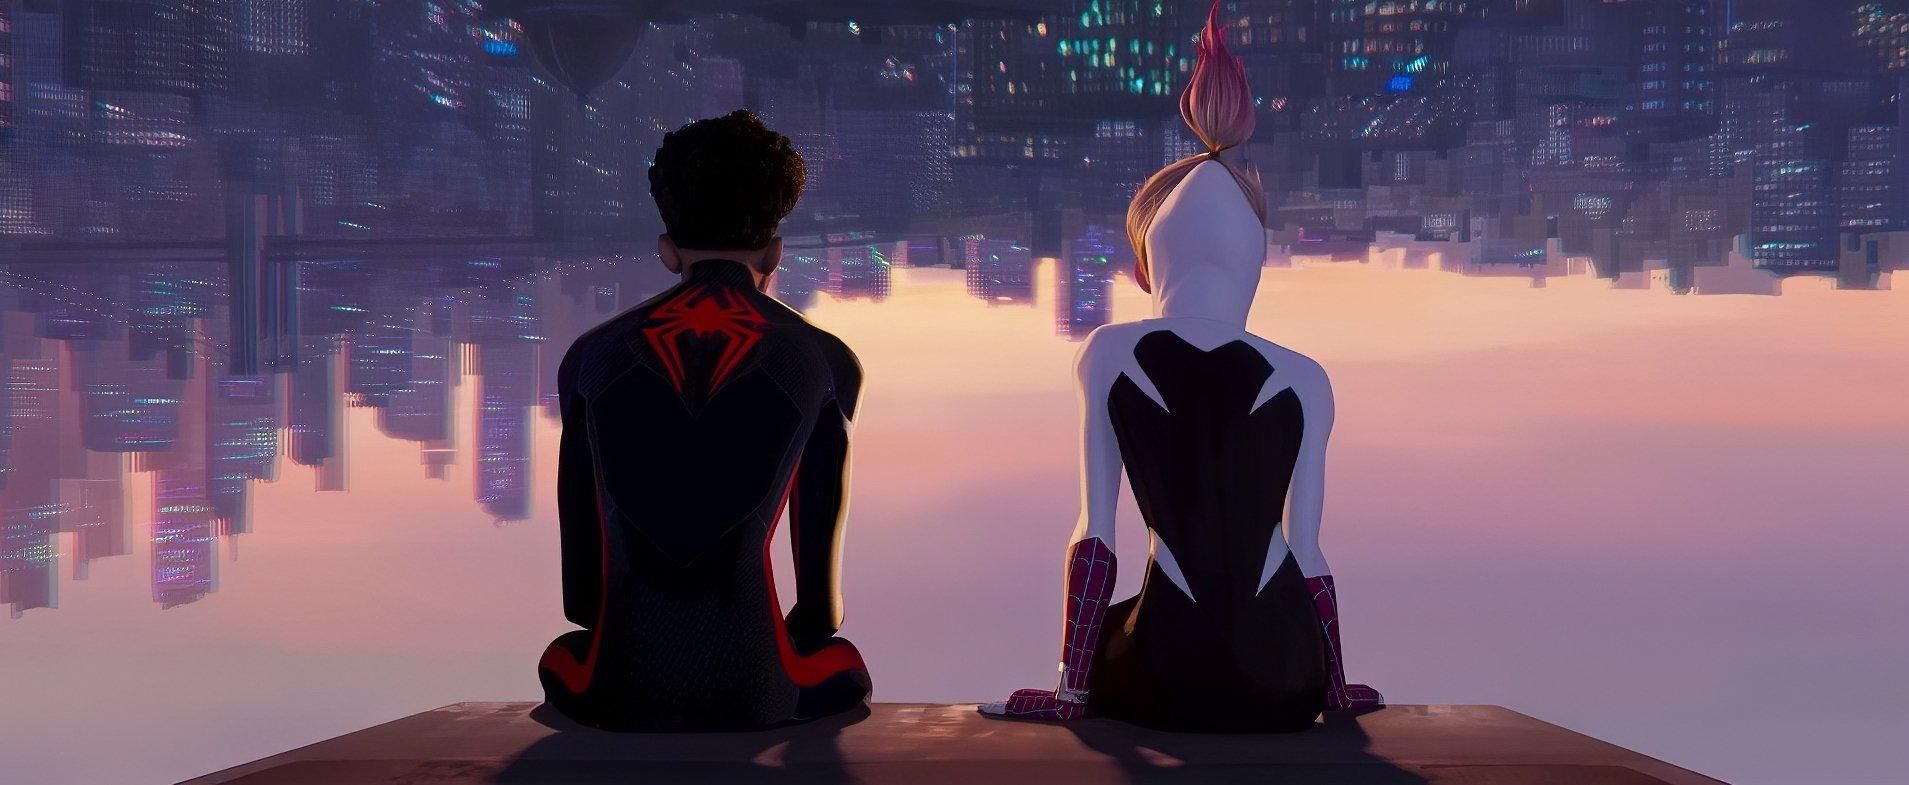 Into the Spider-Verse Remains Spider-Man's Most Impactful Story